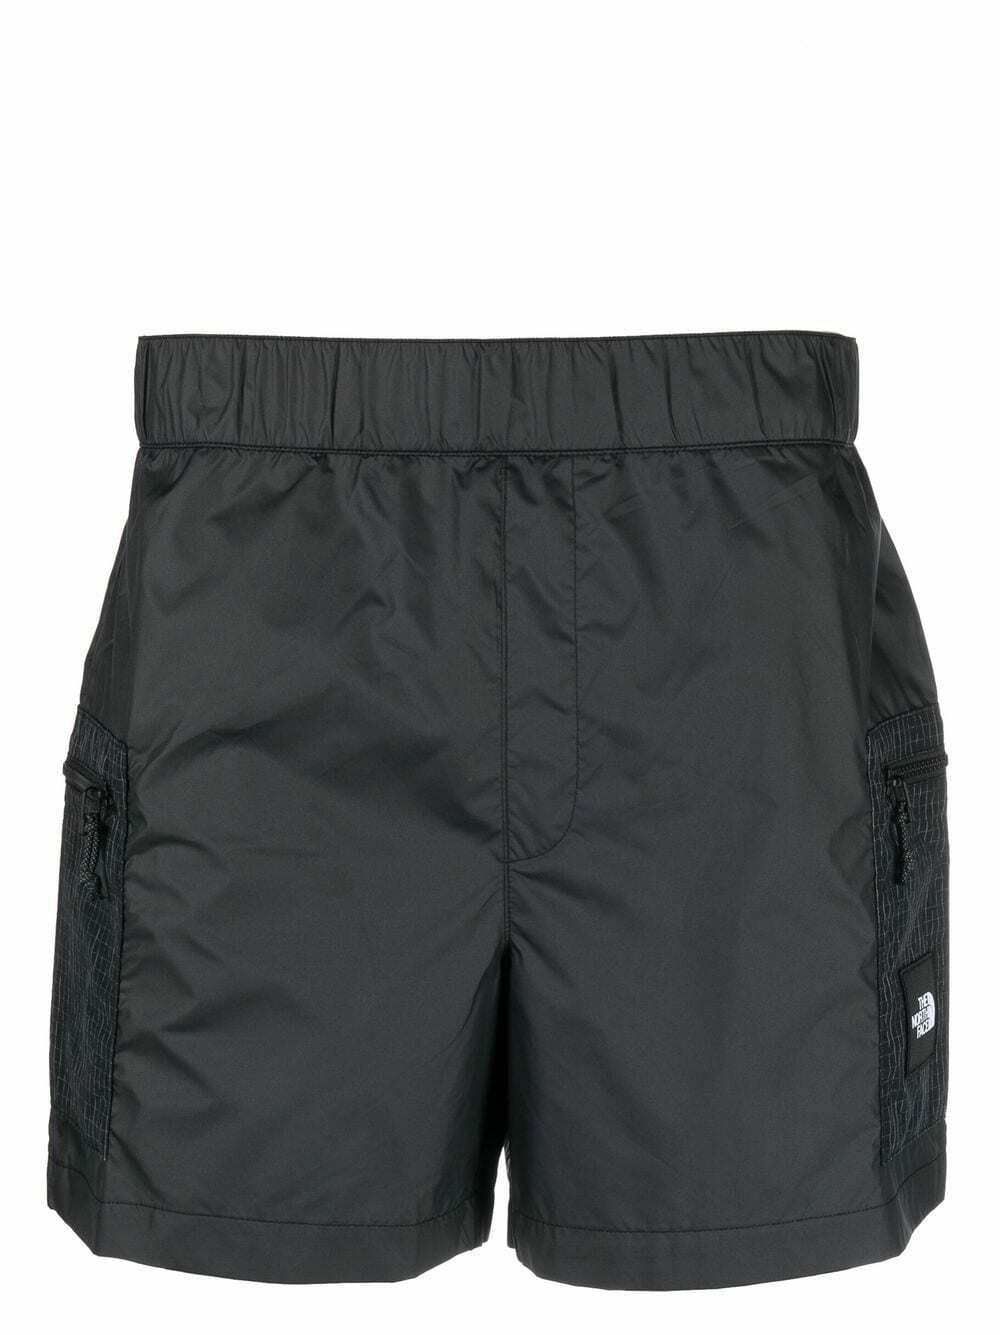 THE NORTH FACE - Bermuda Shorts With Logo The North Face